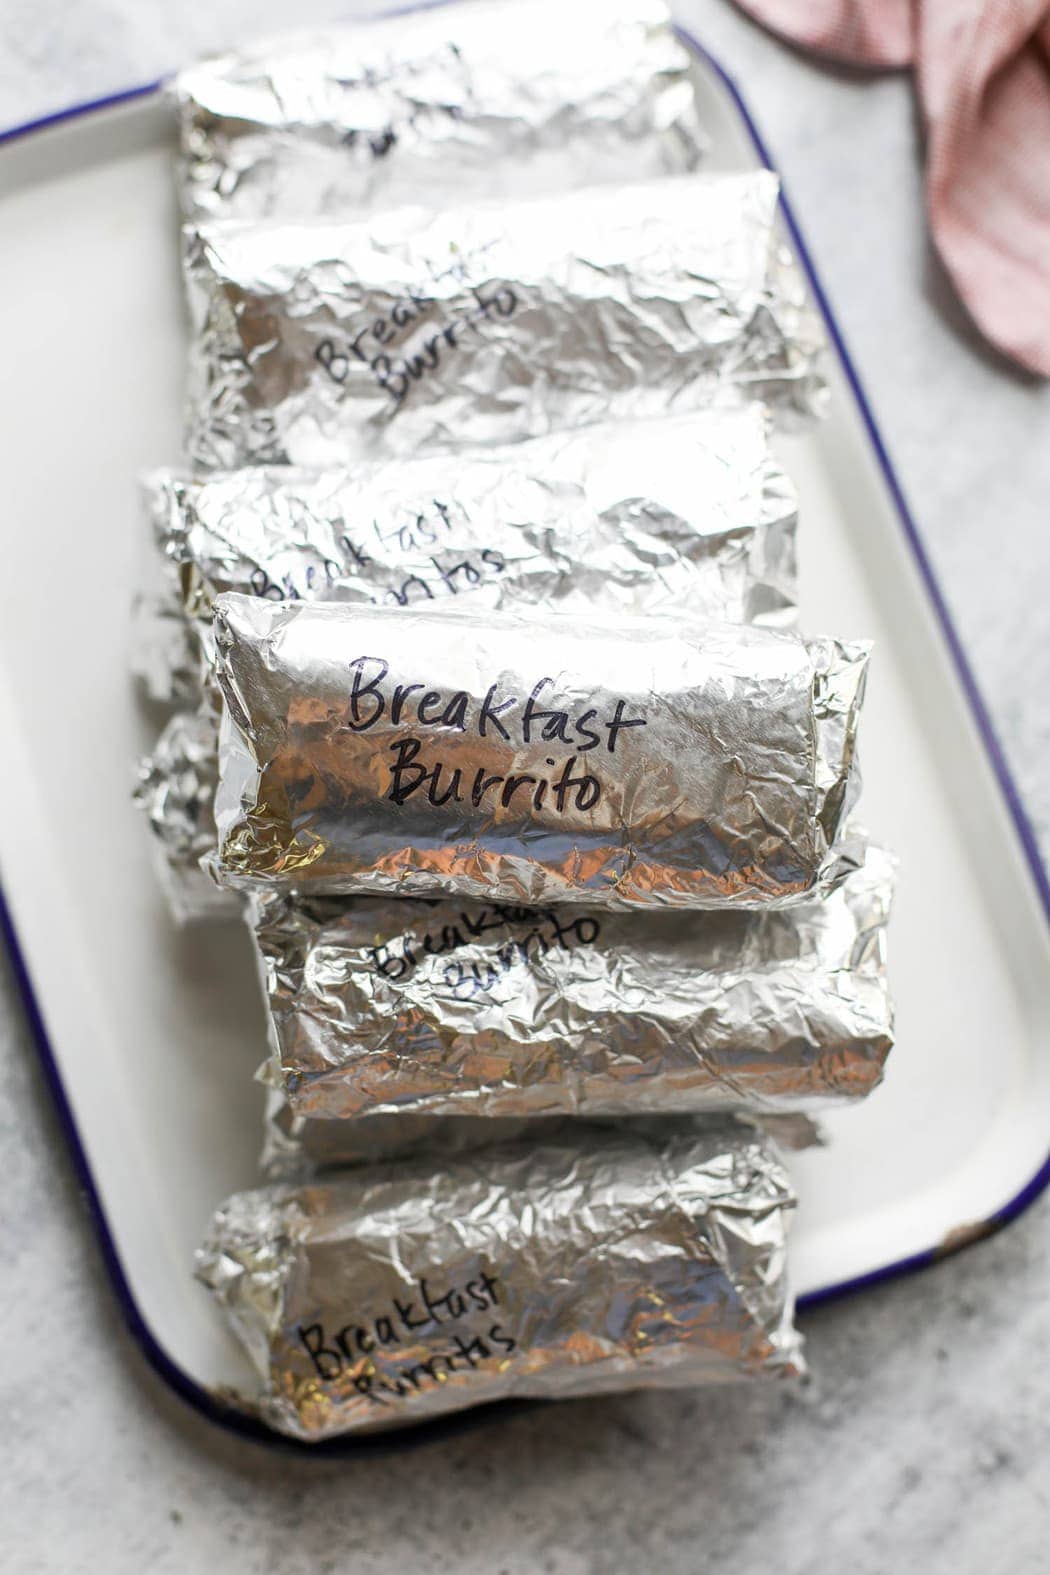 A stack of breakfast burritos on a white metal tray ready for placing in the freezer